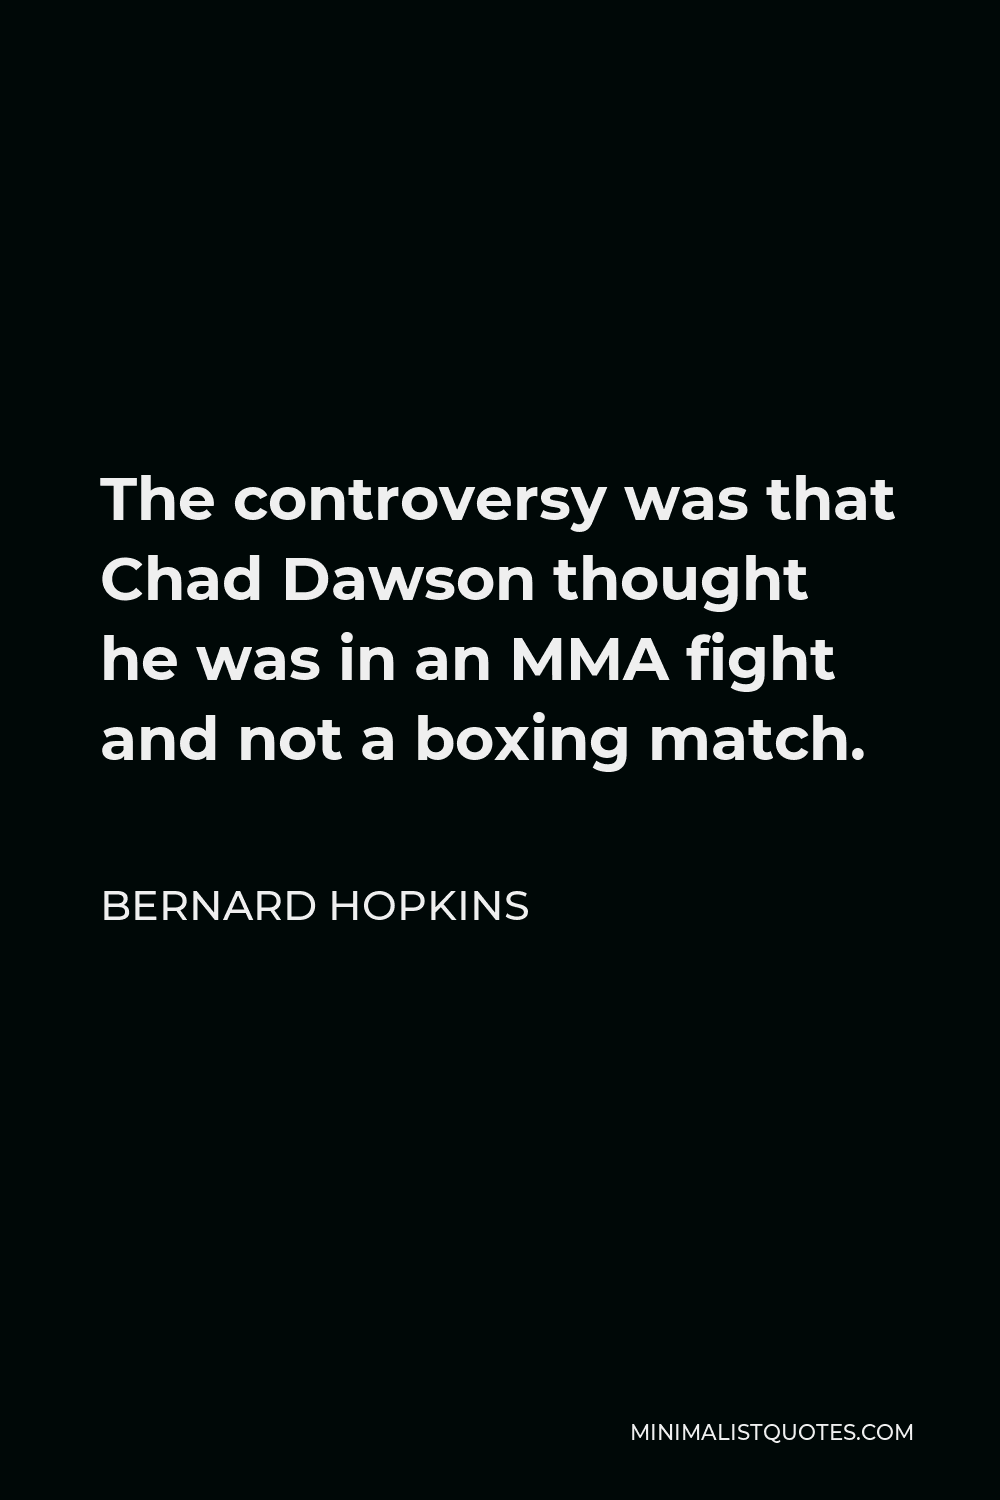 Bernard Hopkins Quote - The controversy was that Chad Dawson thought he was in an MMA fight and not a boxing match.